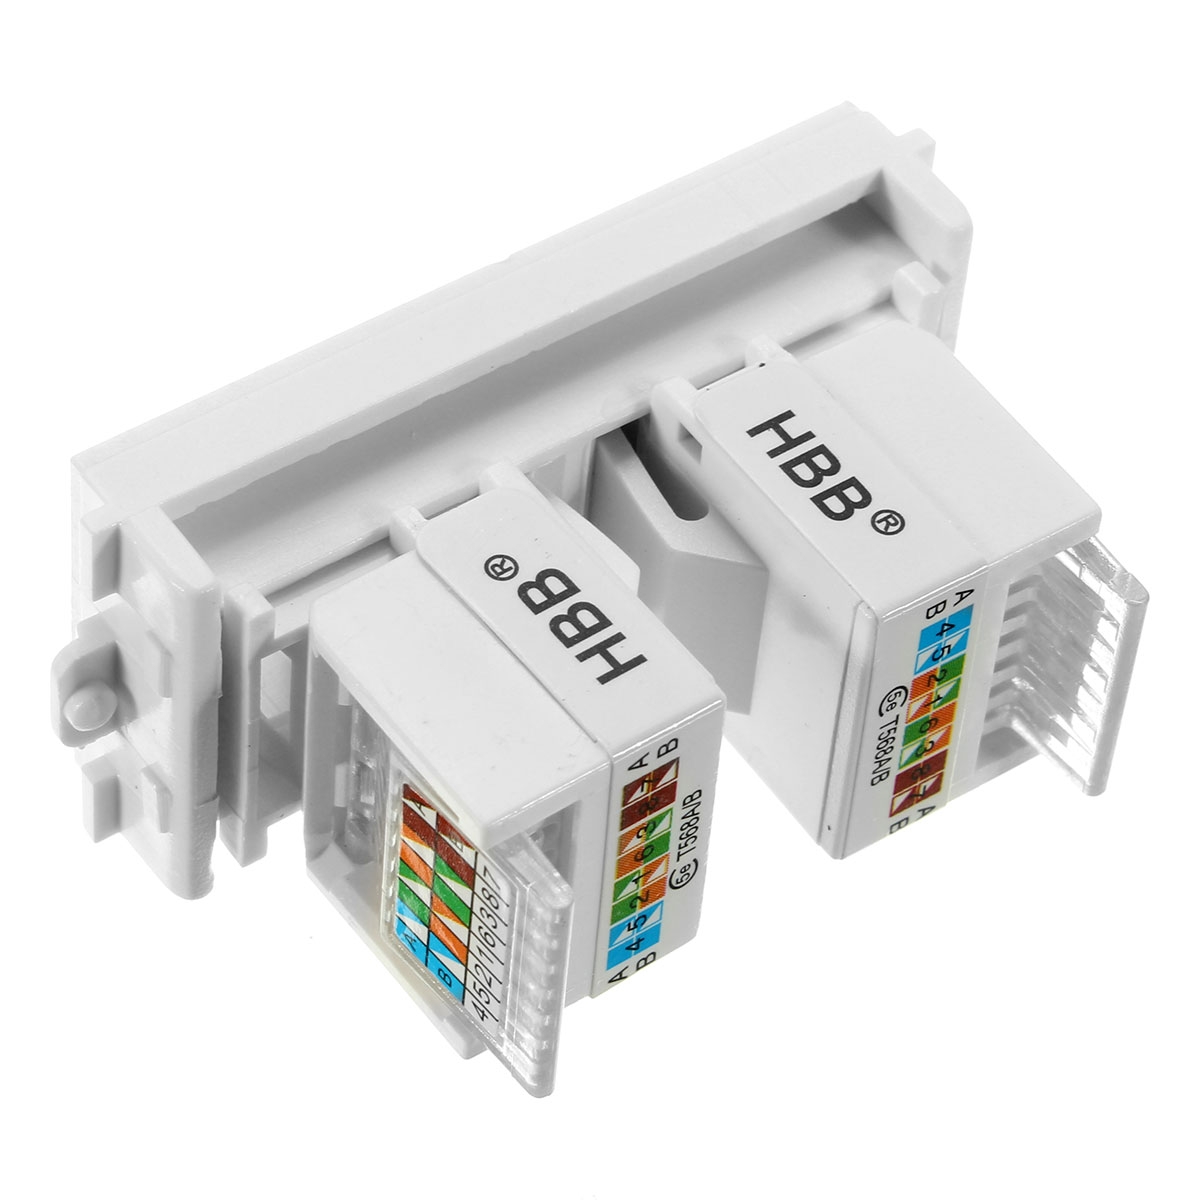 RJ45-Wall-Plate-Dual-Port-Socket-Panel-Building-Materials-Network-Combination-Connector-Module-1401148-2